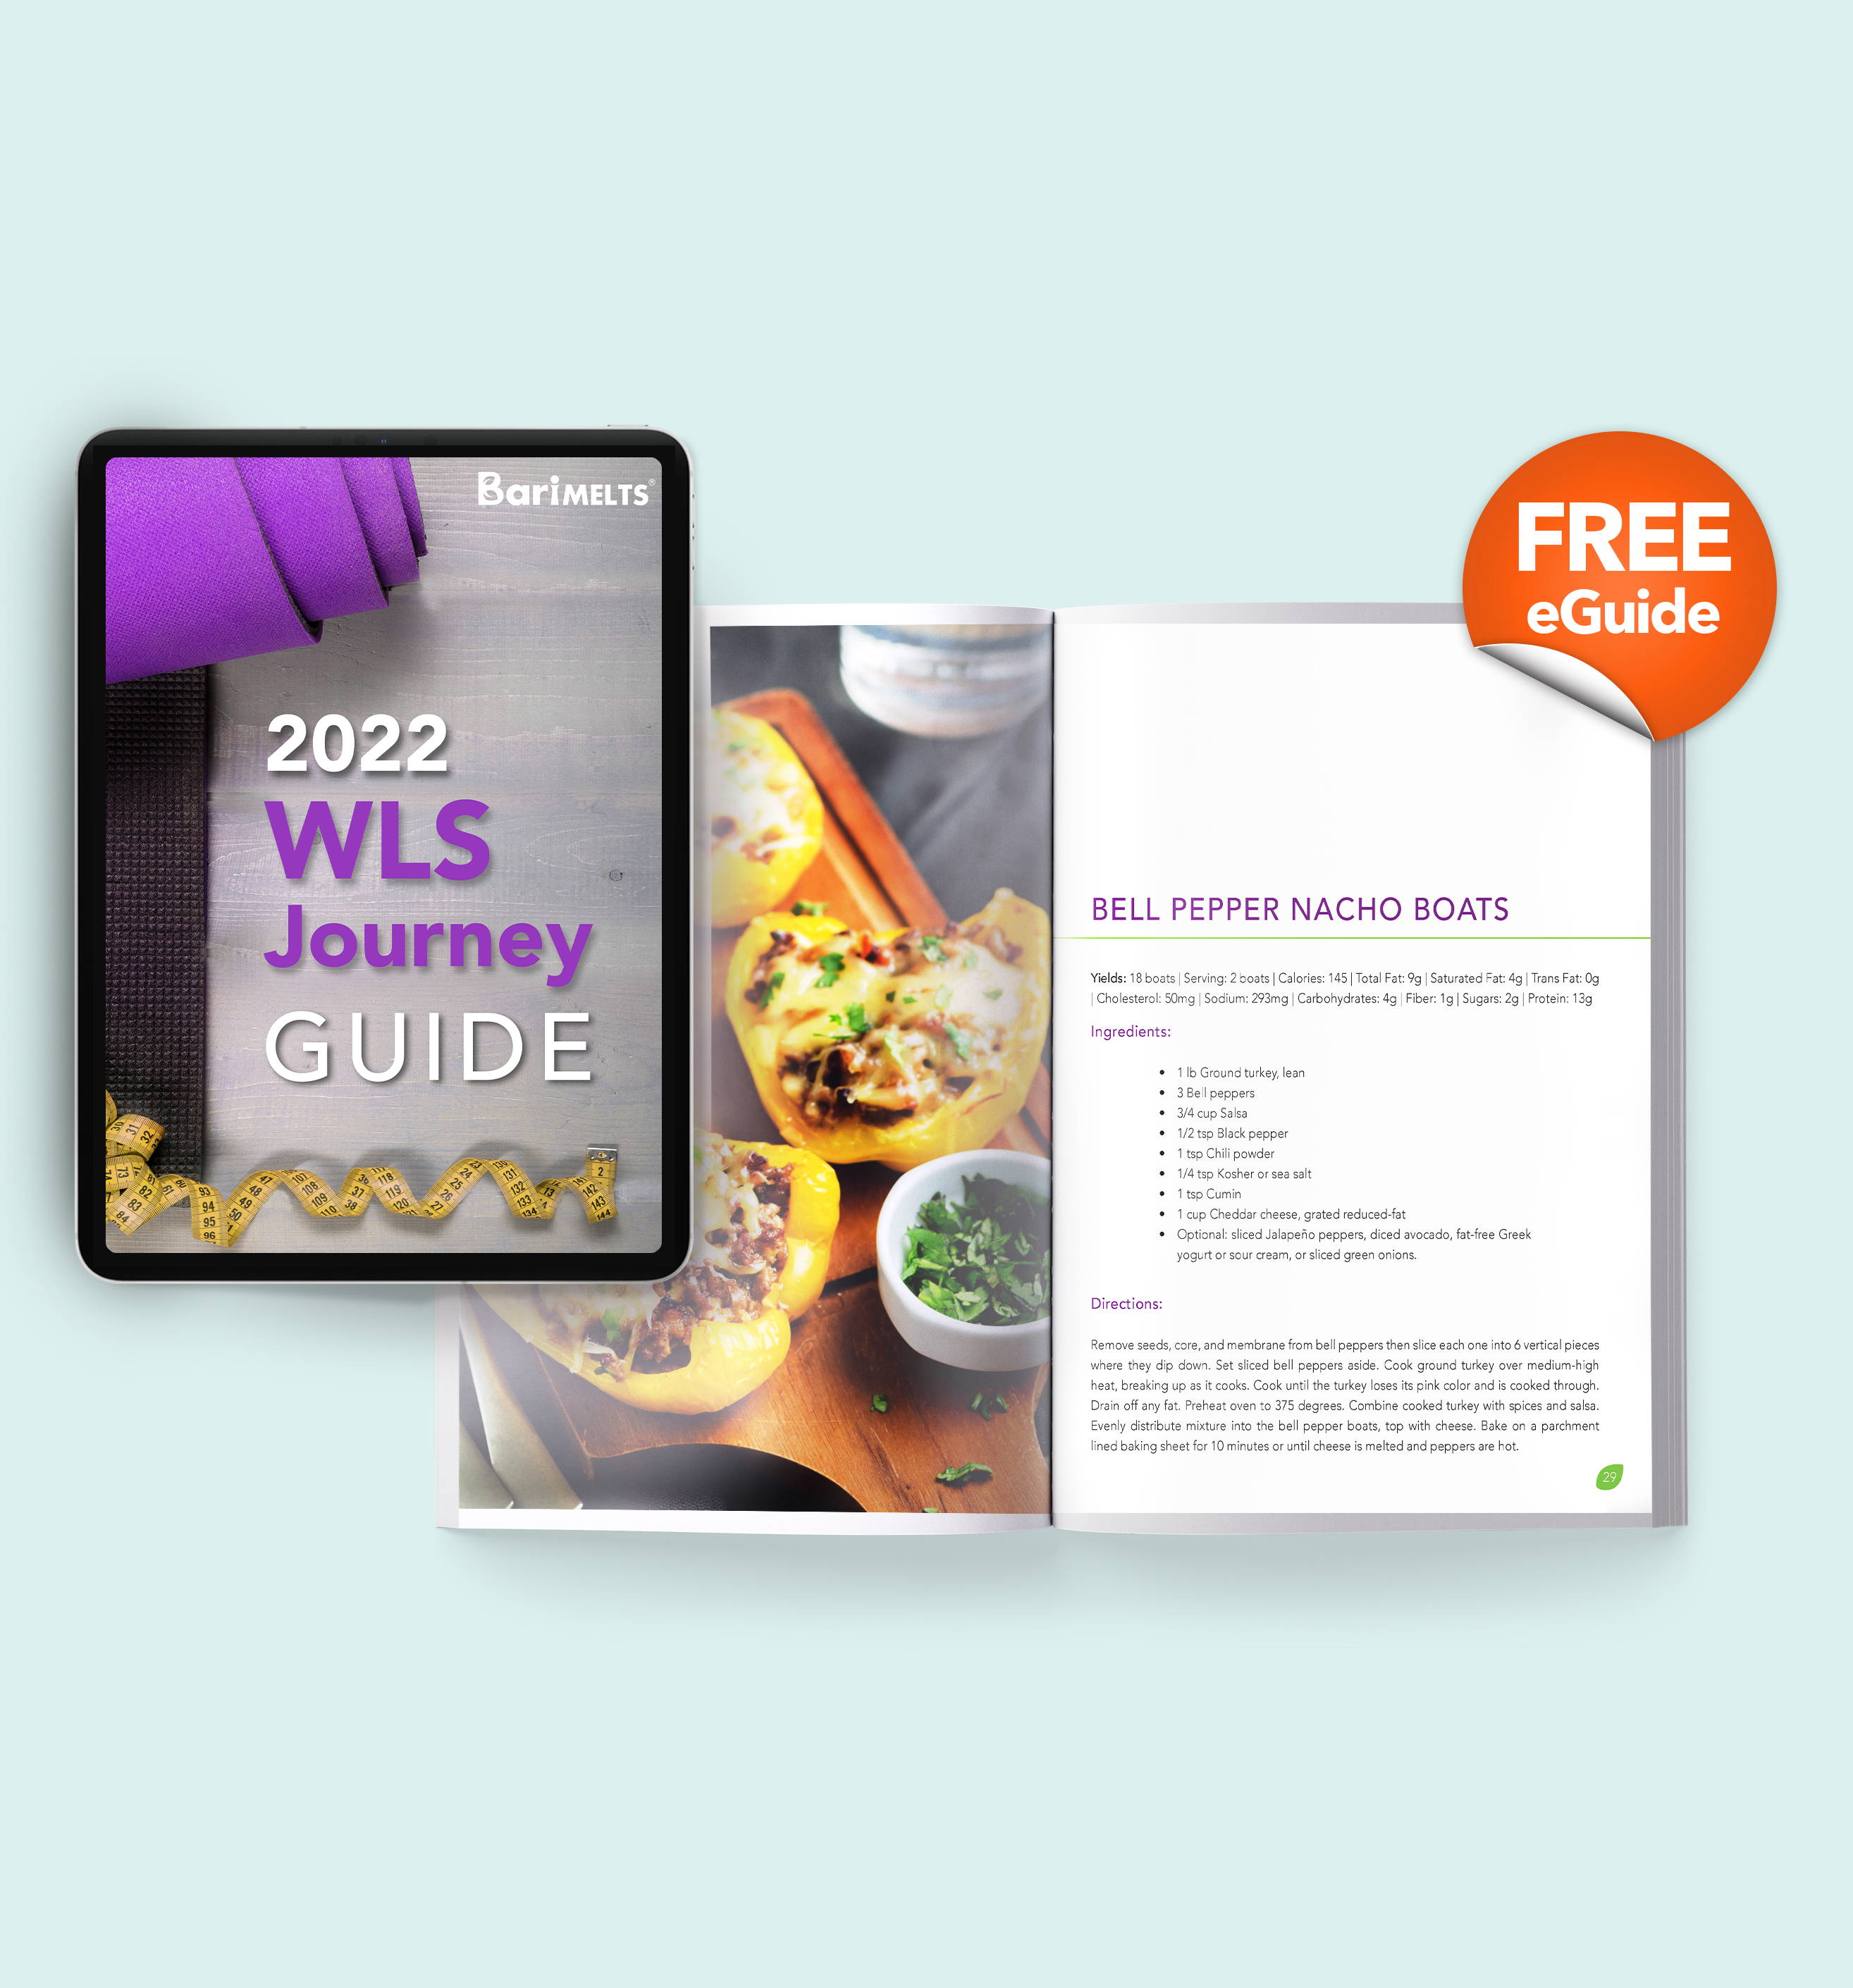 2022bWLS Journey guide